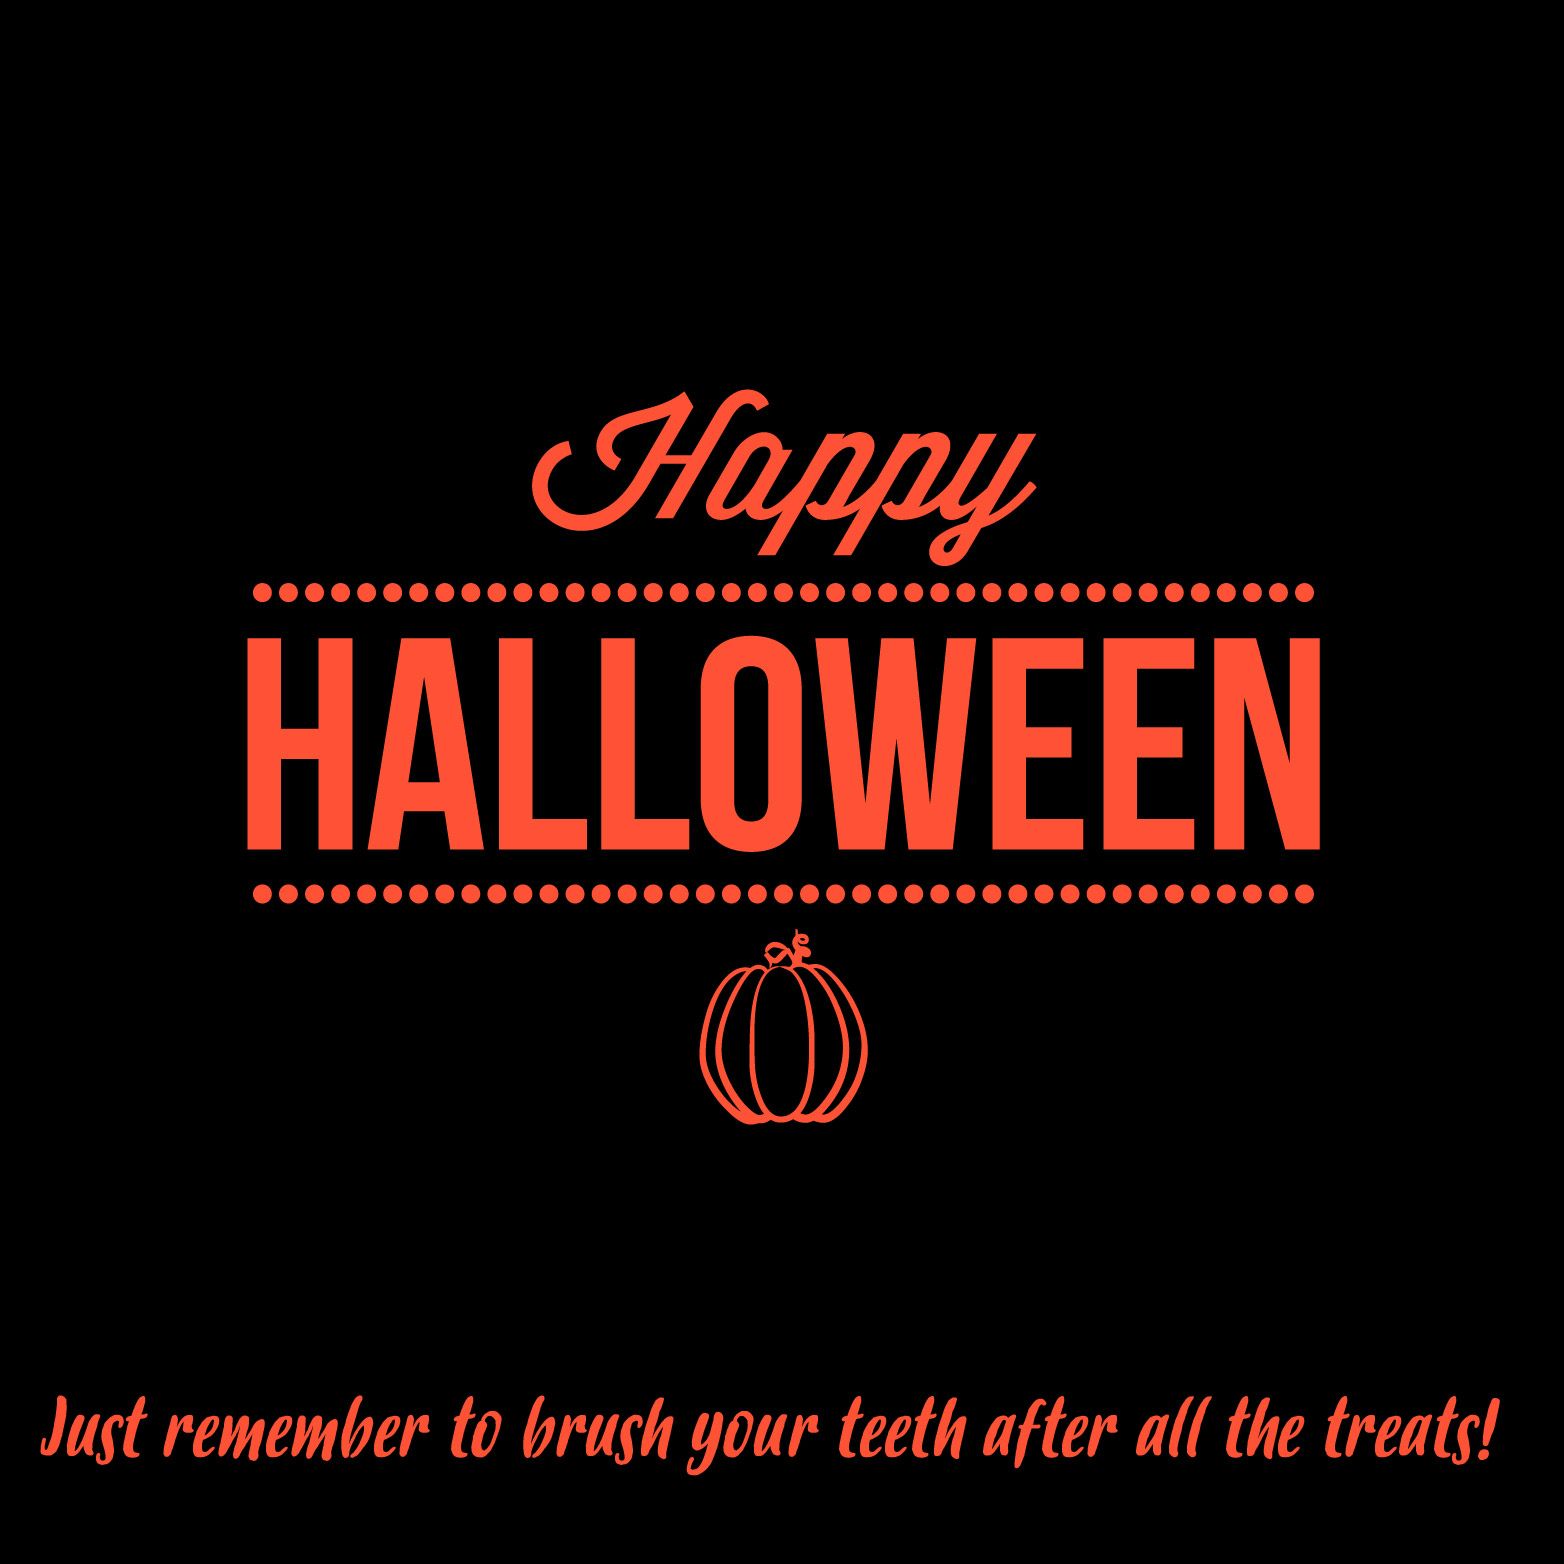 No Tricks, Just Tips for this Halloween!